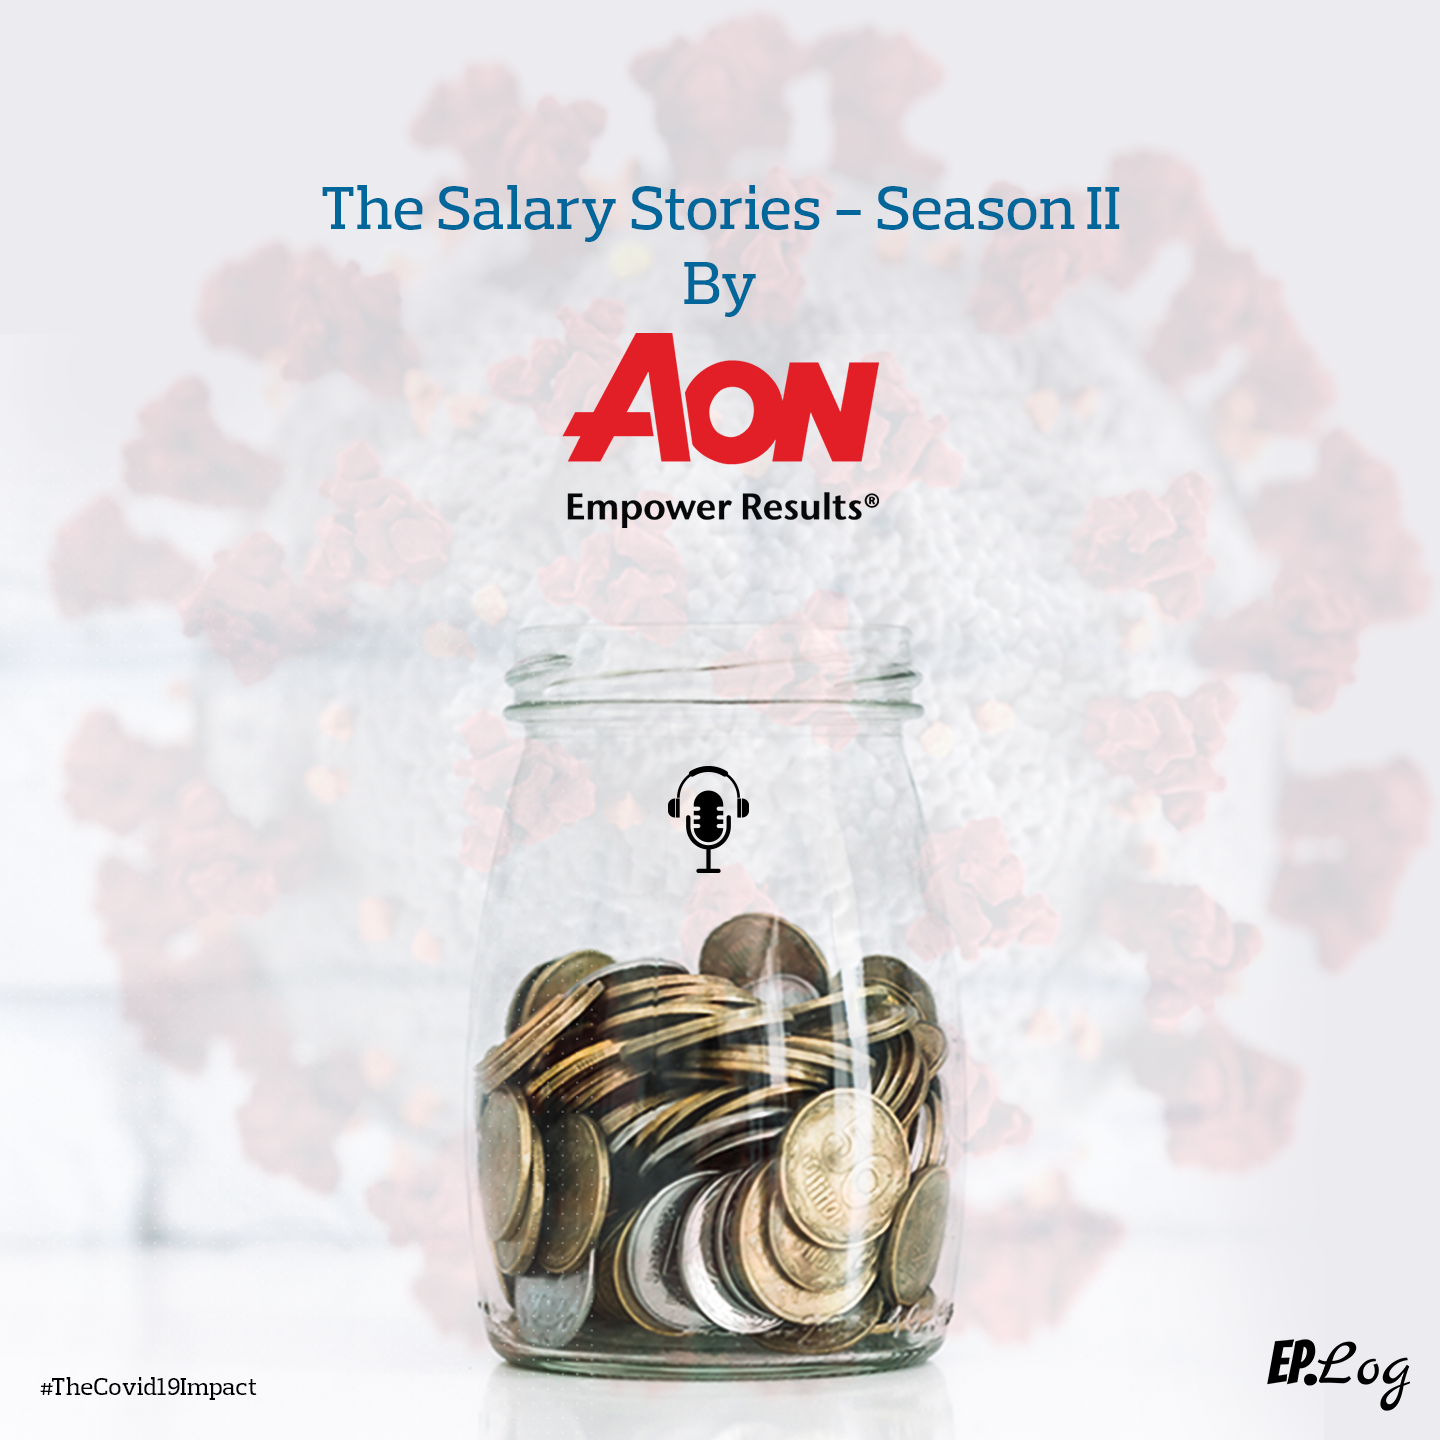 The Salary Stories by Aon